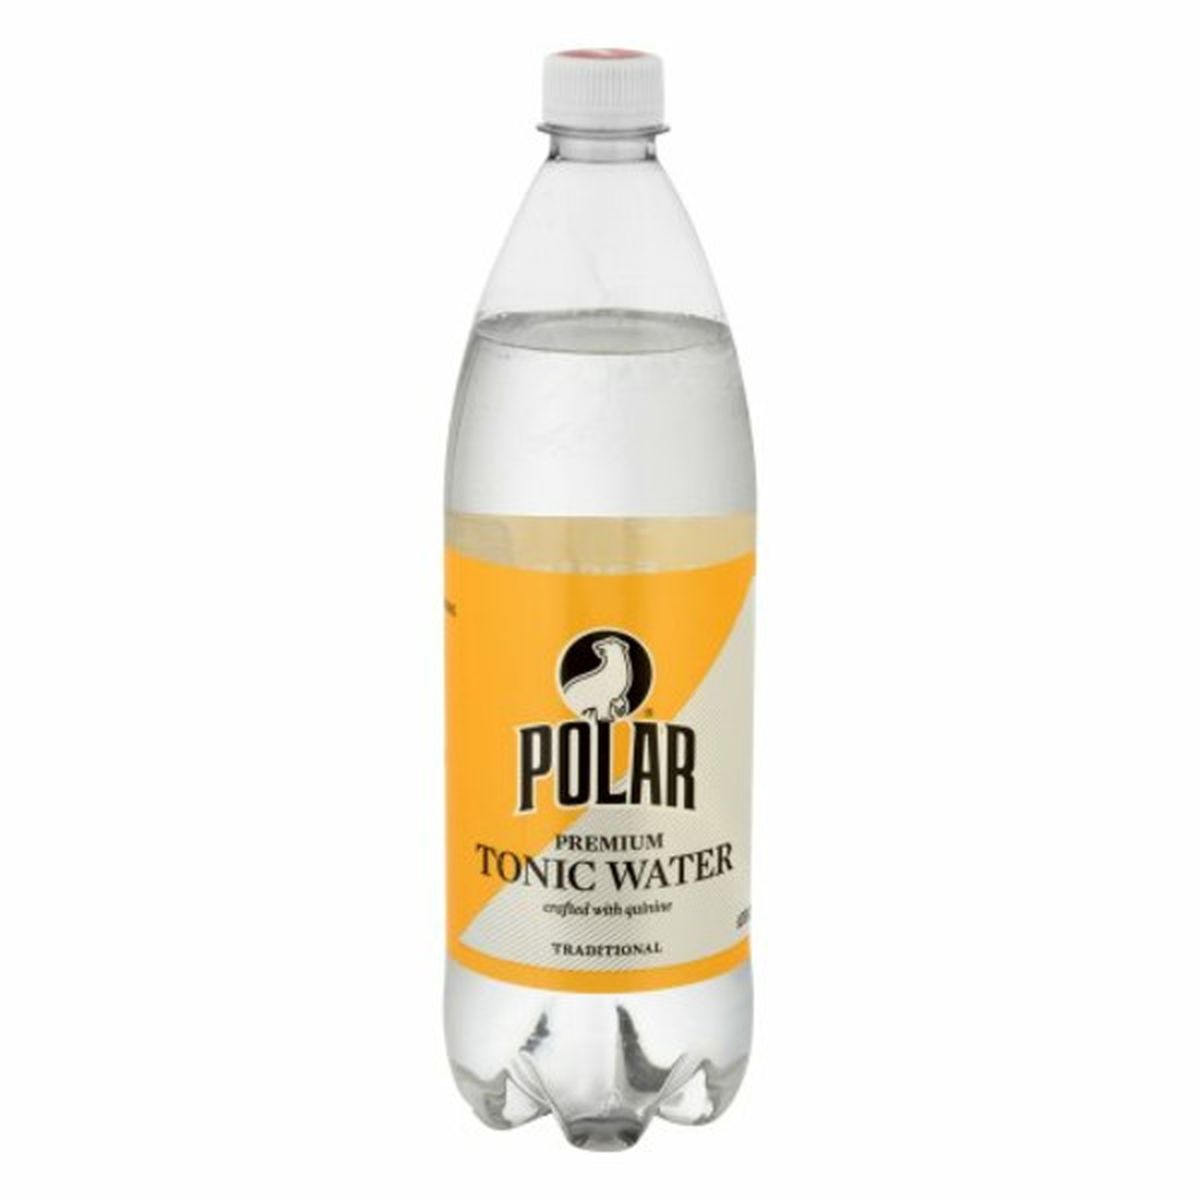 Calories in Polar Tonic Water, Traditional